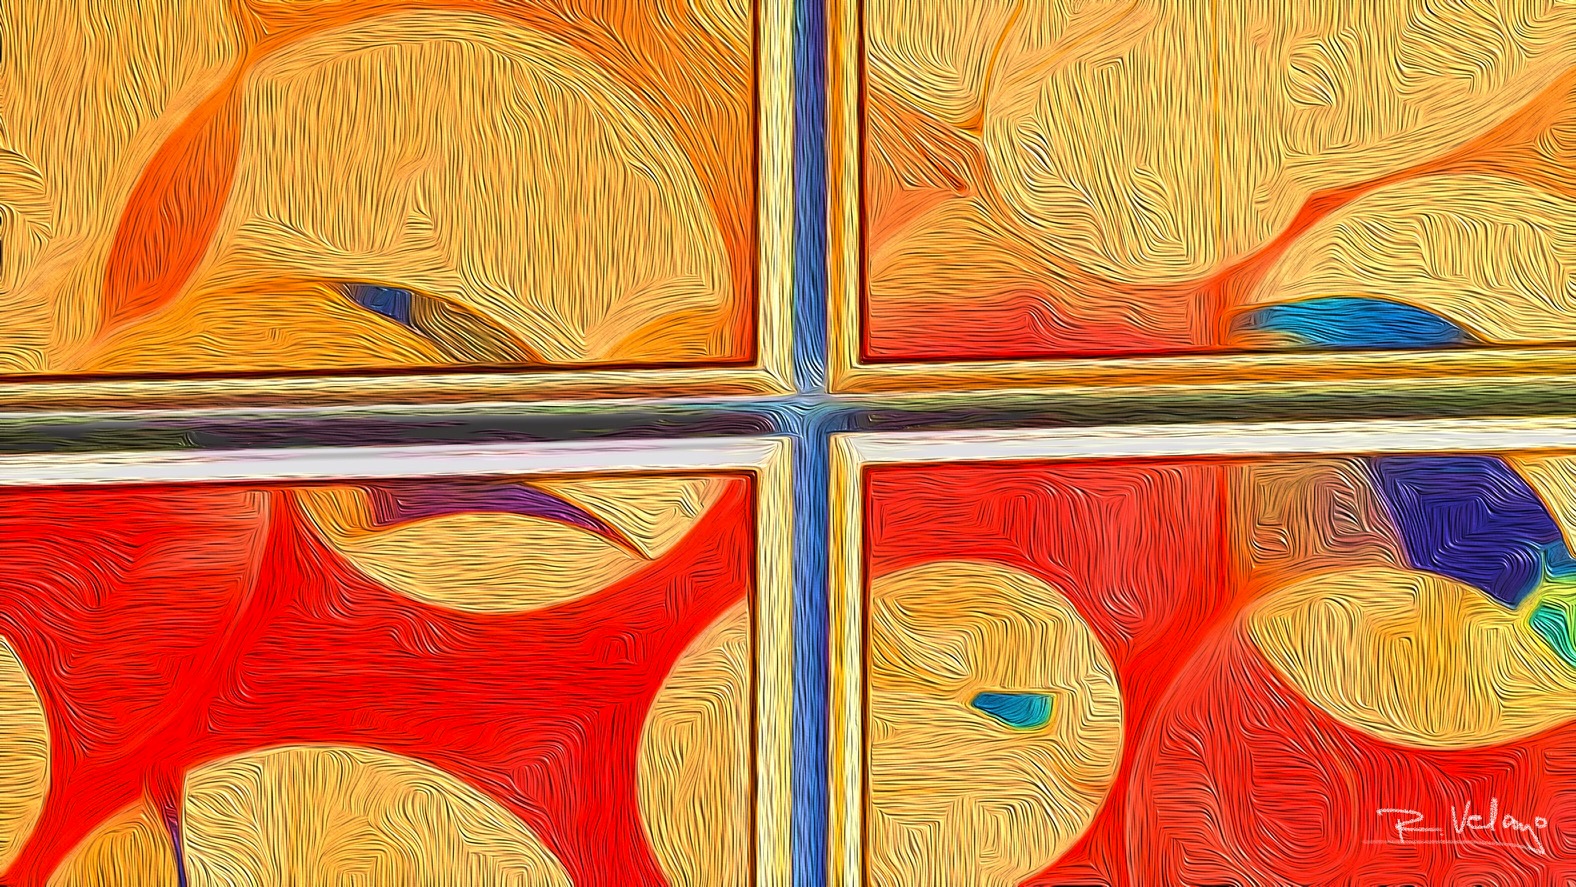 "CORNERS OF FOUR ABSTRACT FRAMED ART" [Created: 1/28/2021]